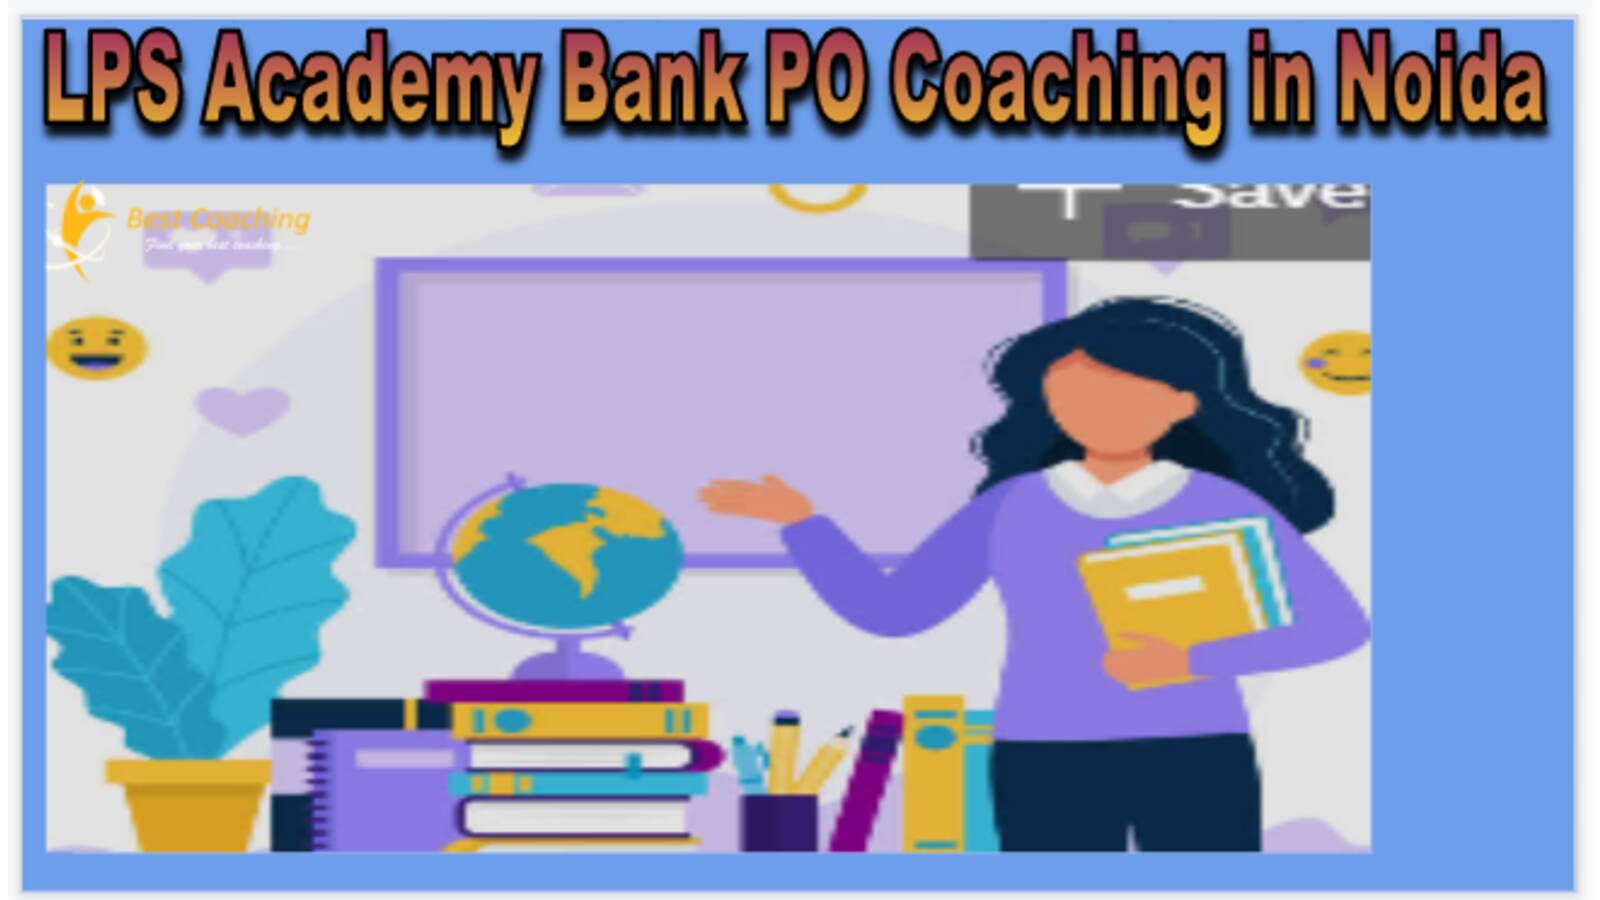 LPS academy Bank PO Coaching in Noida